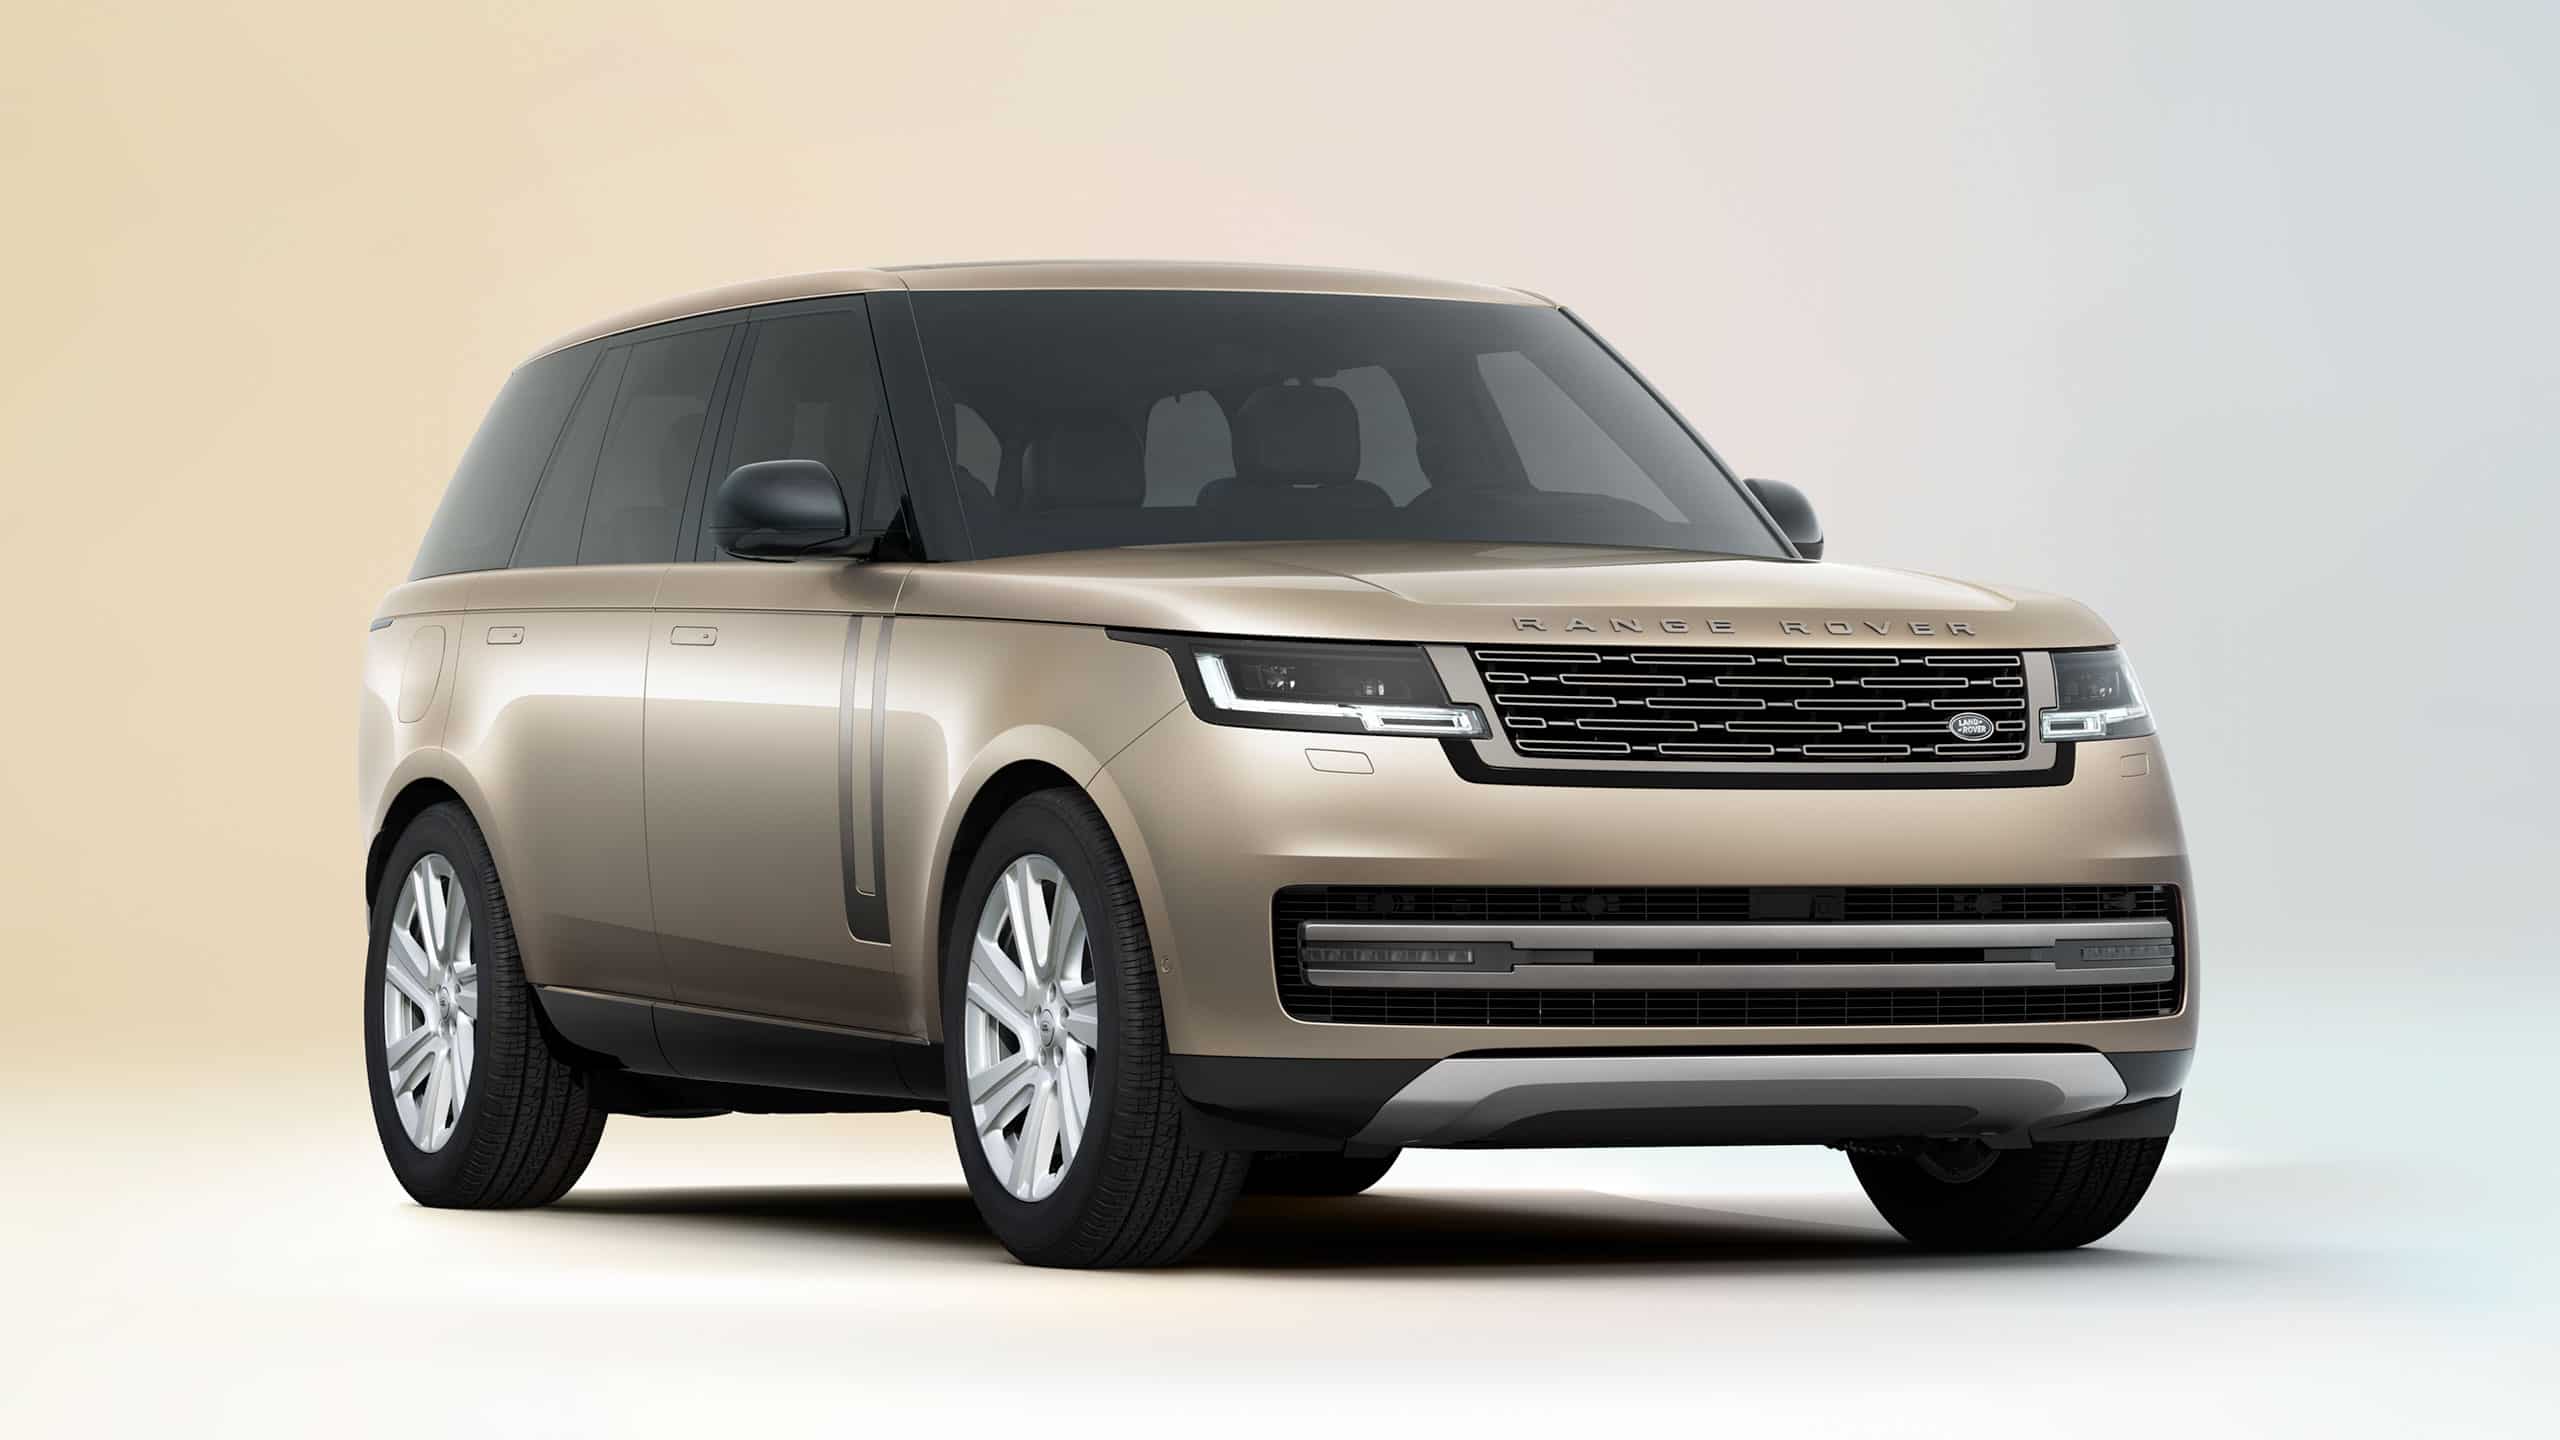 what is the autobiography range rover